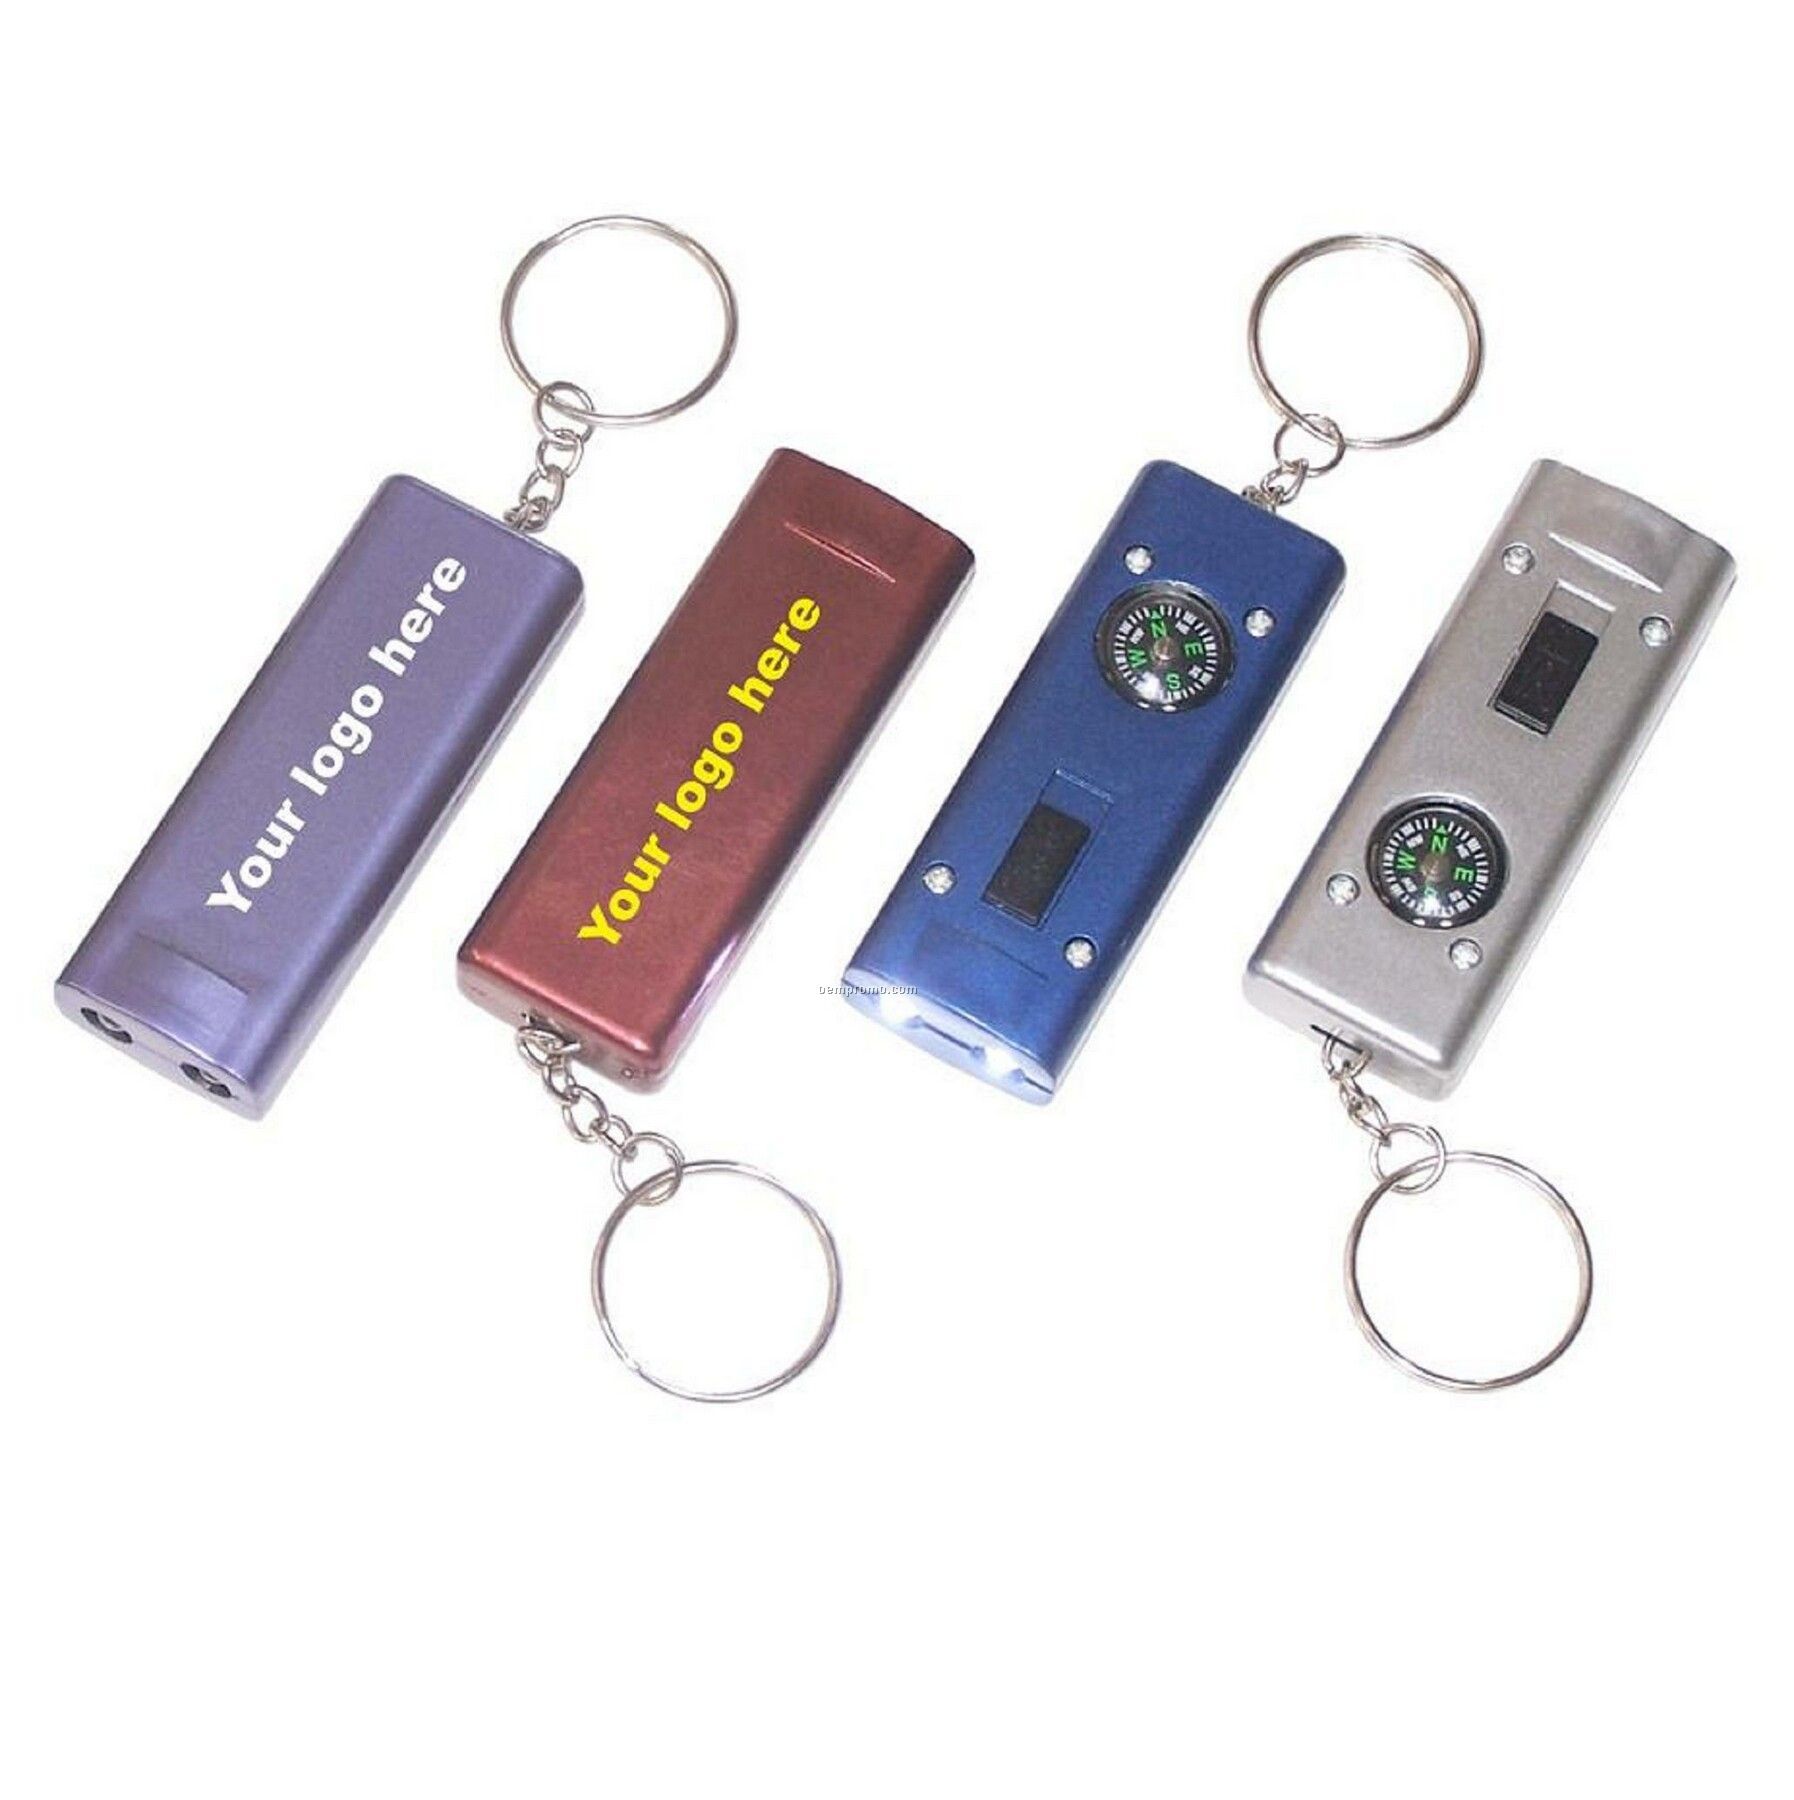 Key Holder With Flashlight And Compass.